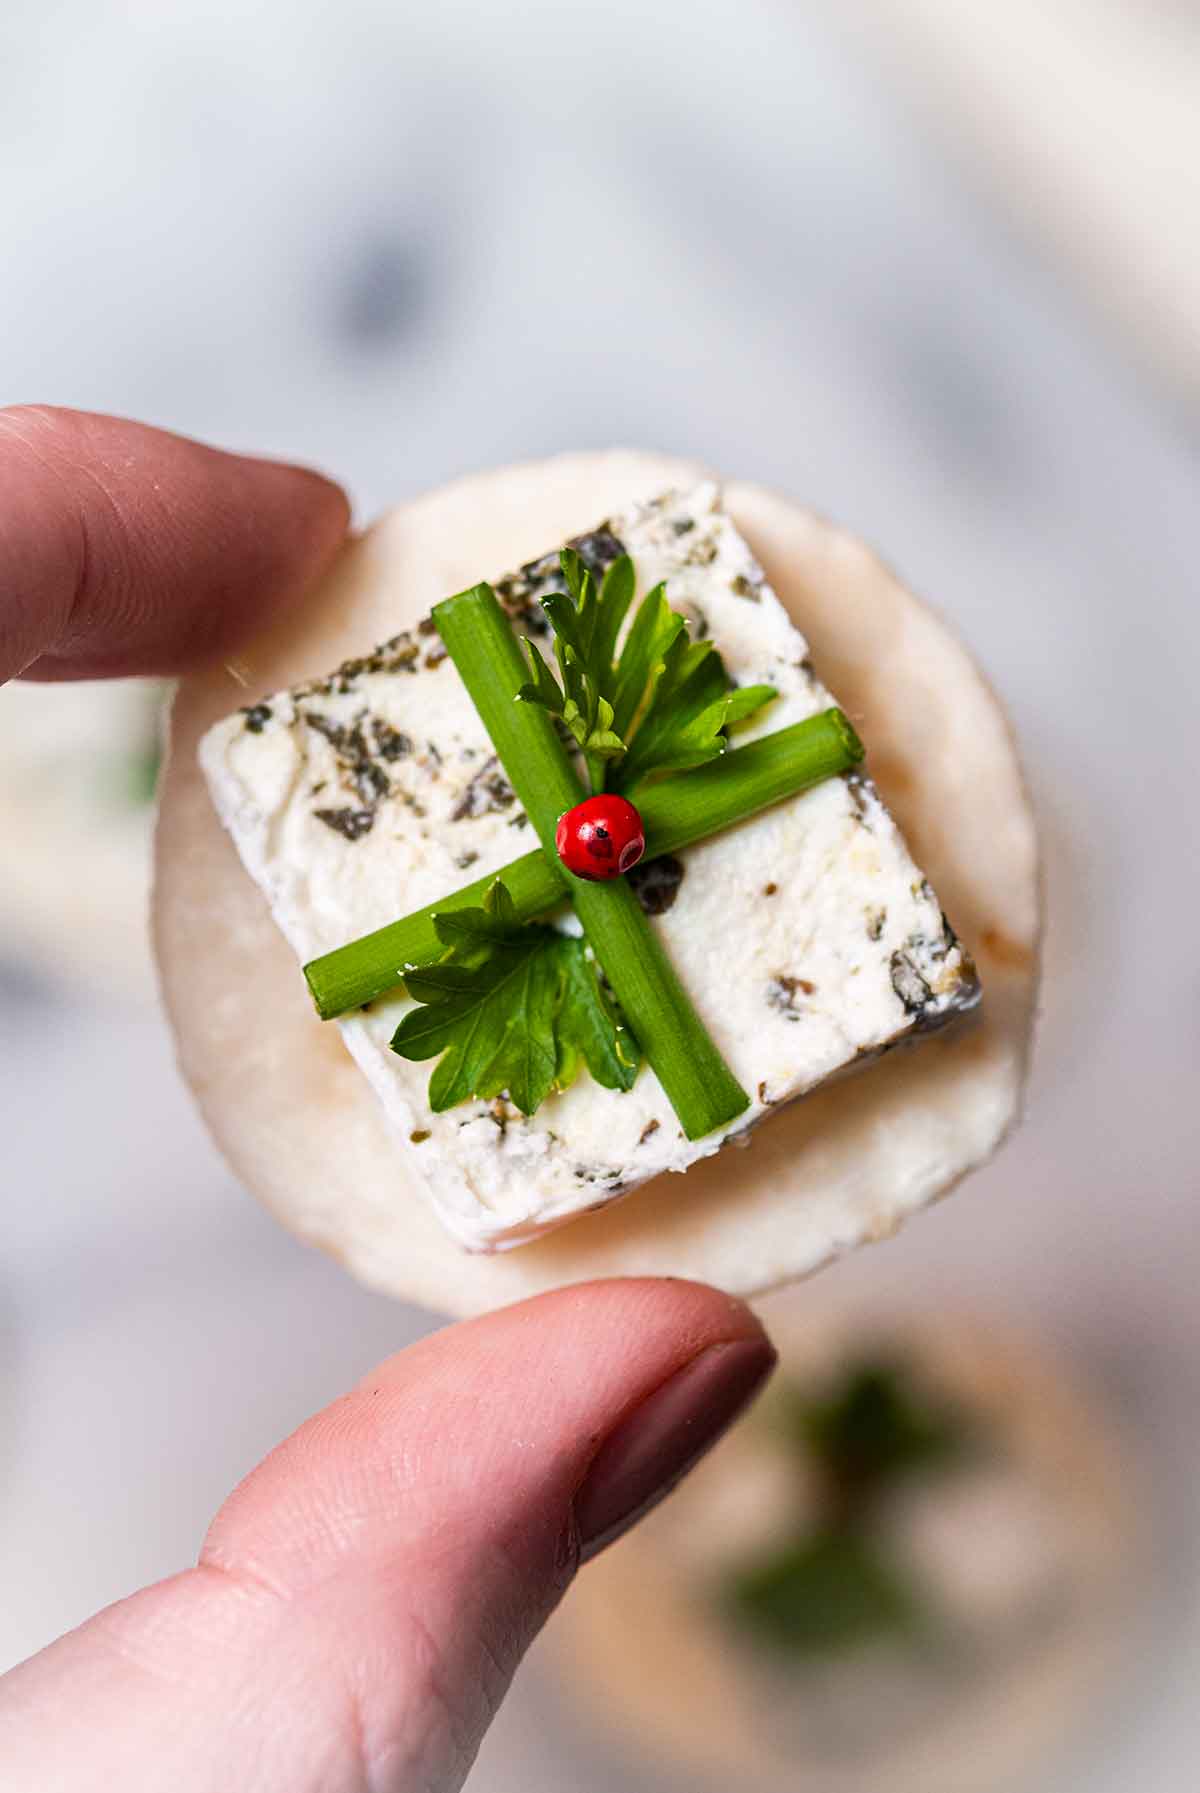 Fingers holding an appetizer that looks like a present on a cracker.